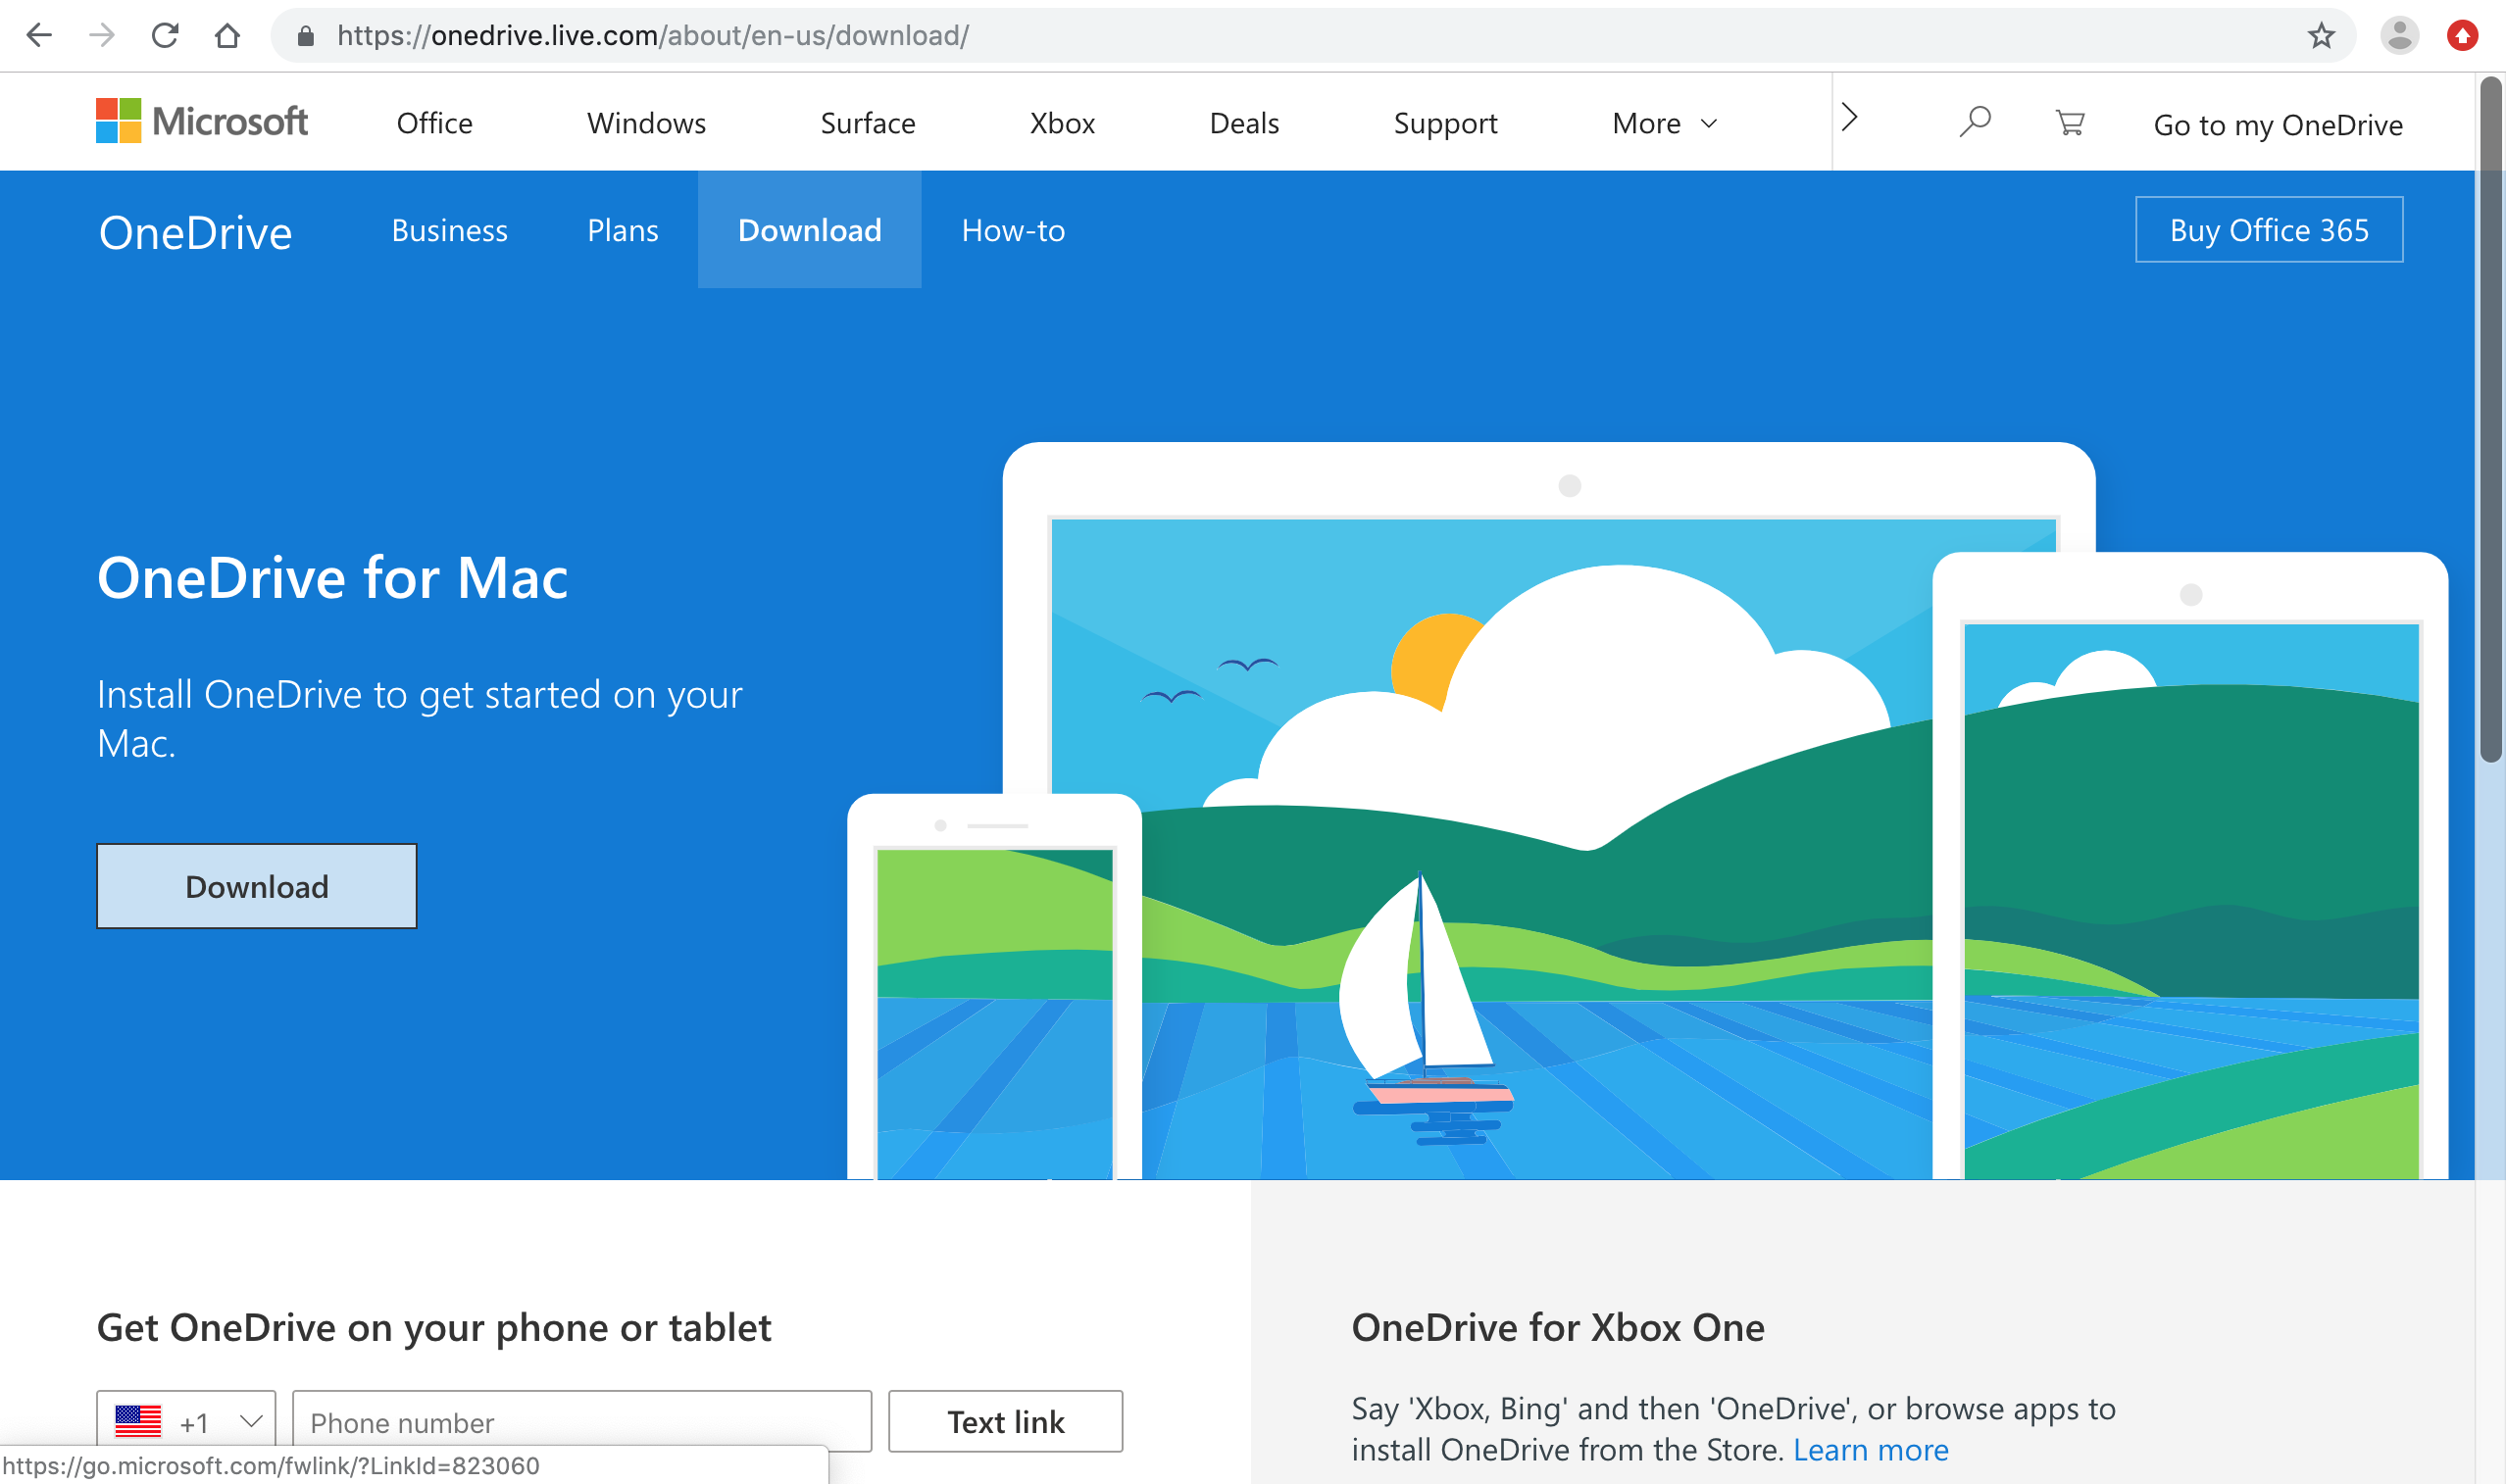 onedrive for business on a mac